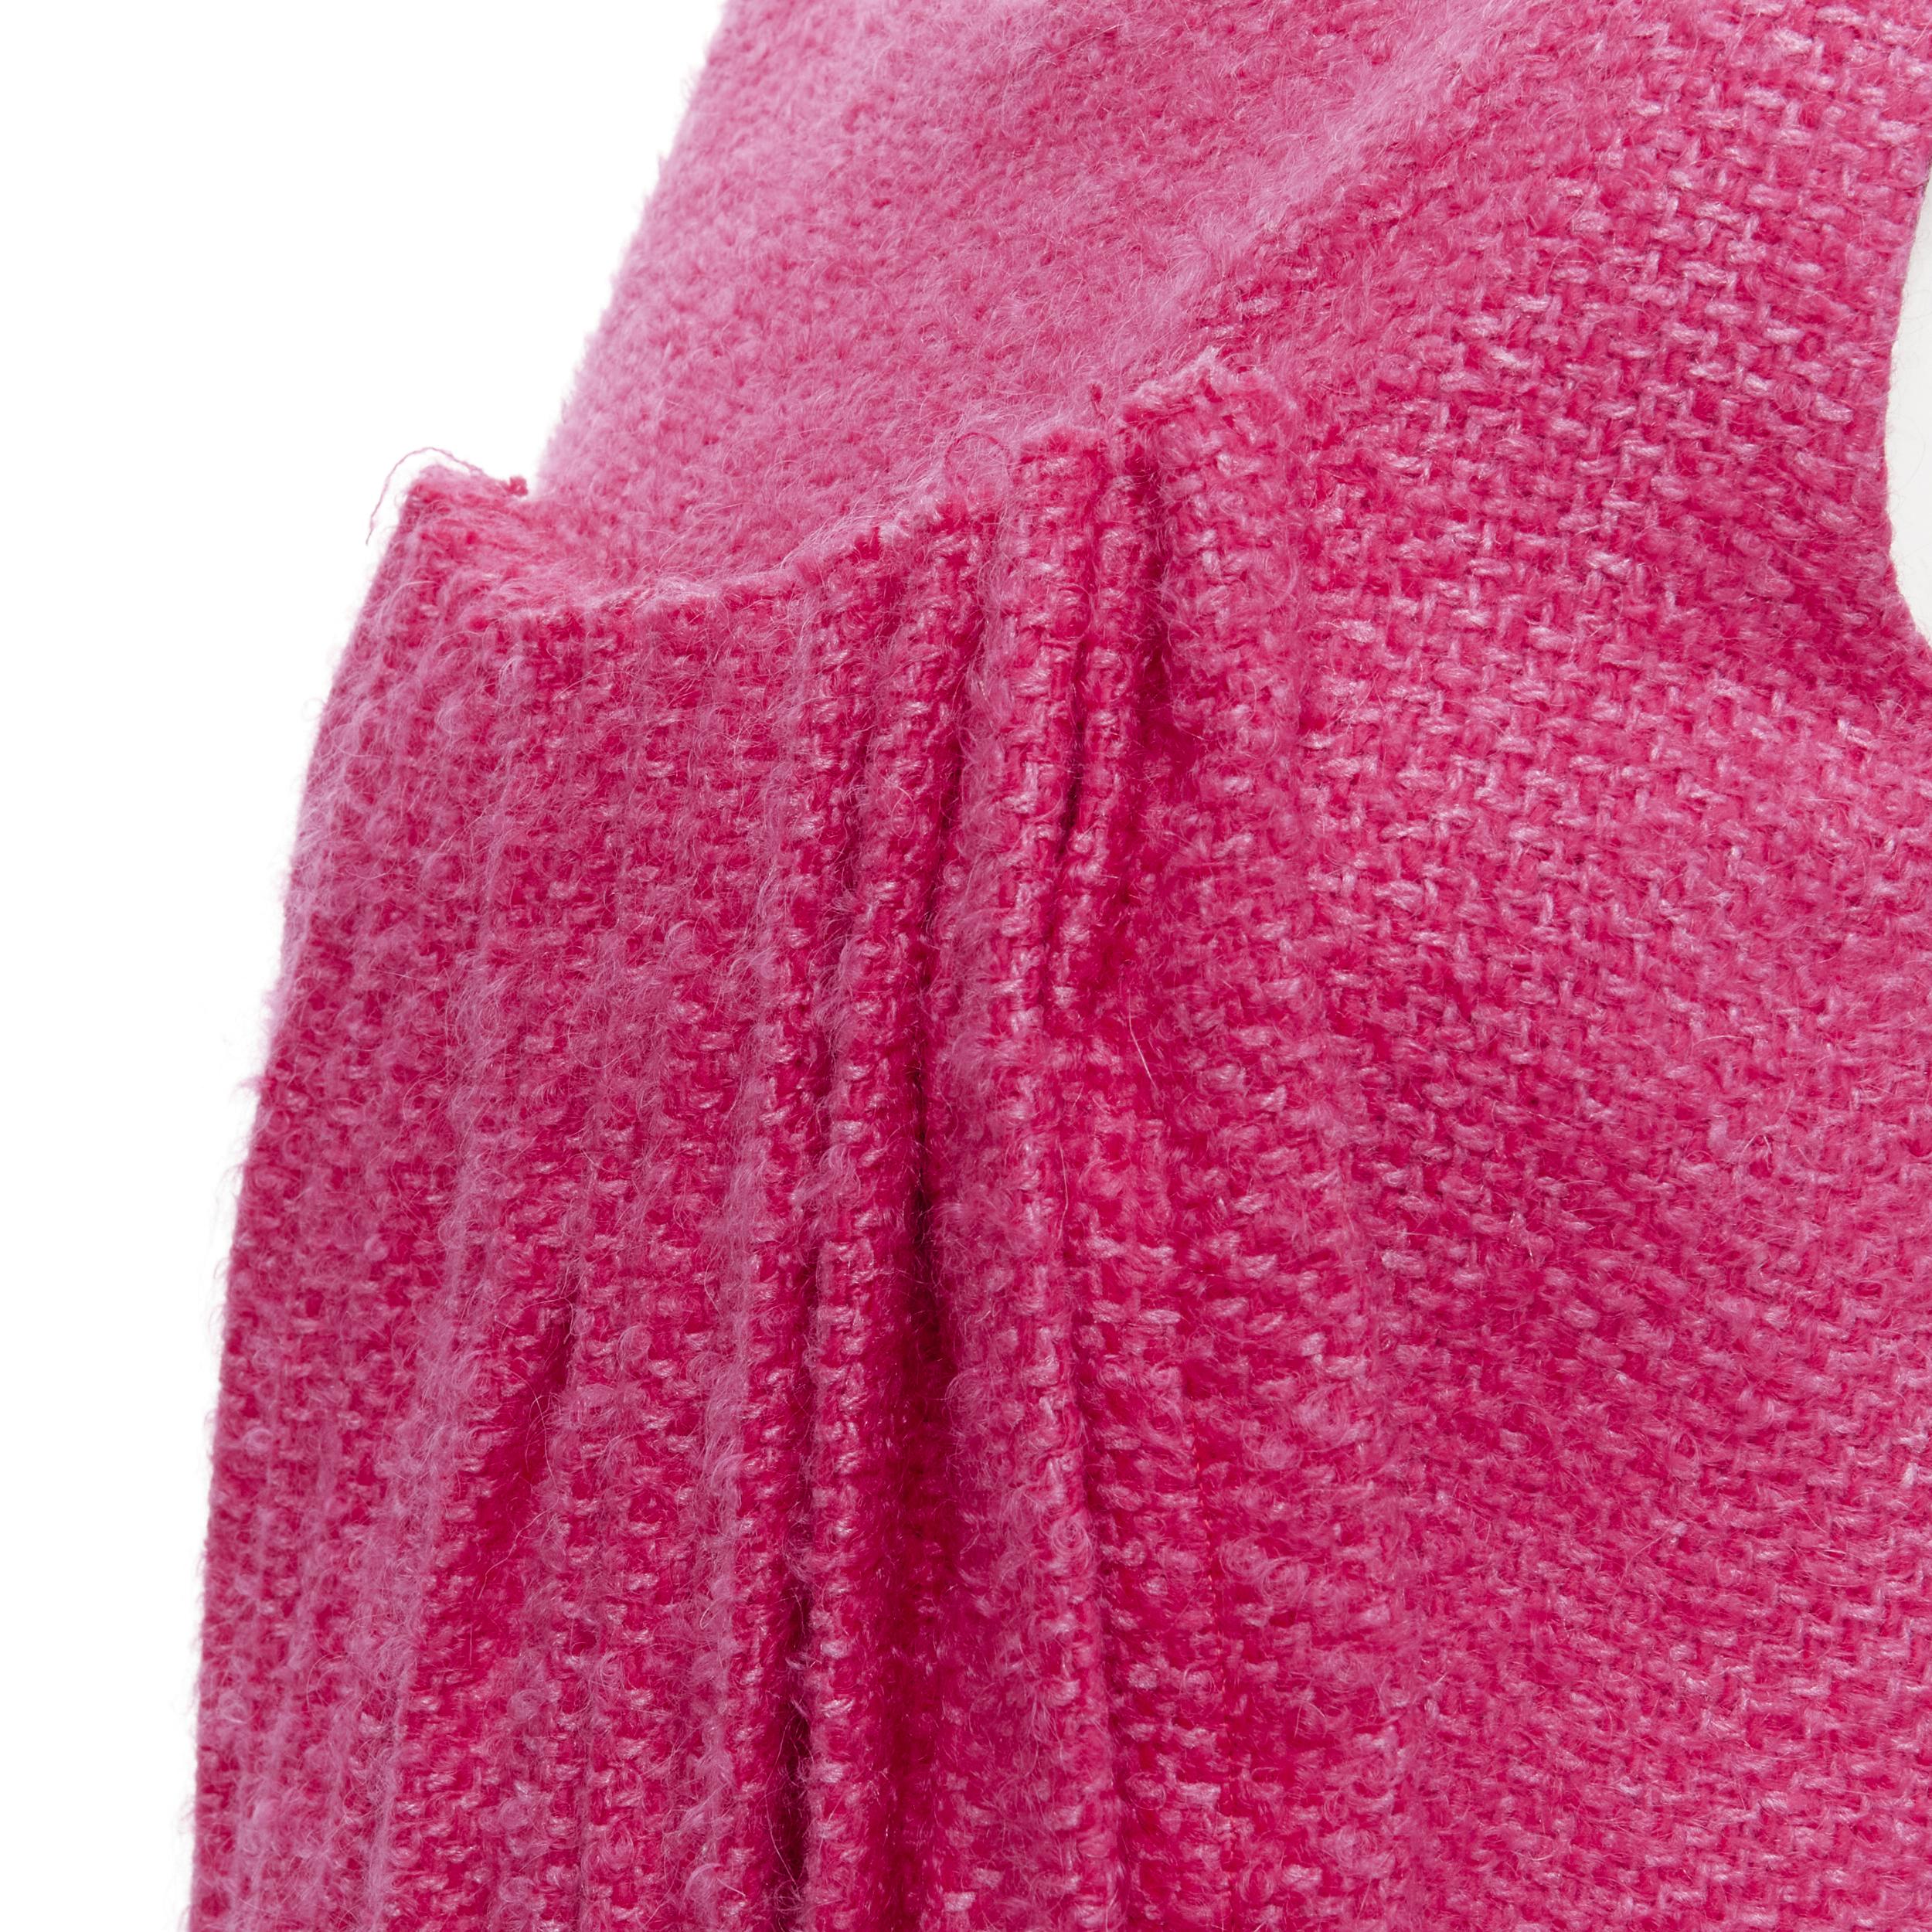 MARNI pink wool tweed gathered pleat contrast back sleeveless dress IT38 XS 
Reference: CELG/A00172 
Brand: Marni 
Material: Tweed 
Color: Pink 
Pattern: Solid 
Closure: Zip 
Made in: Italy 

CONDITION: 
Condition: Excellent, this item was pre-owned